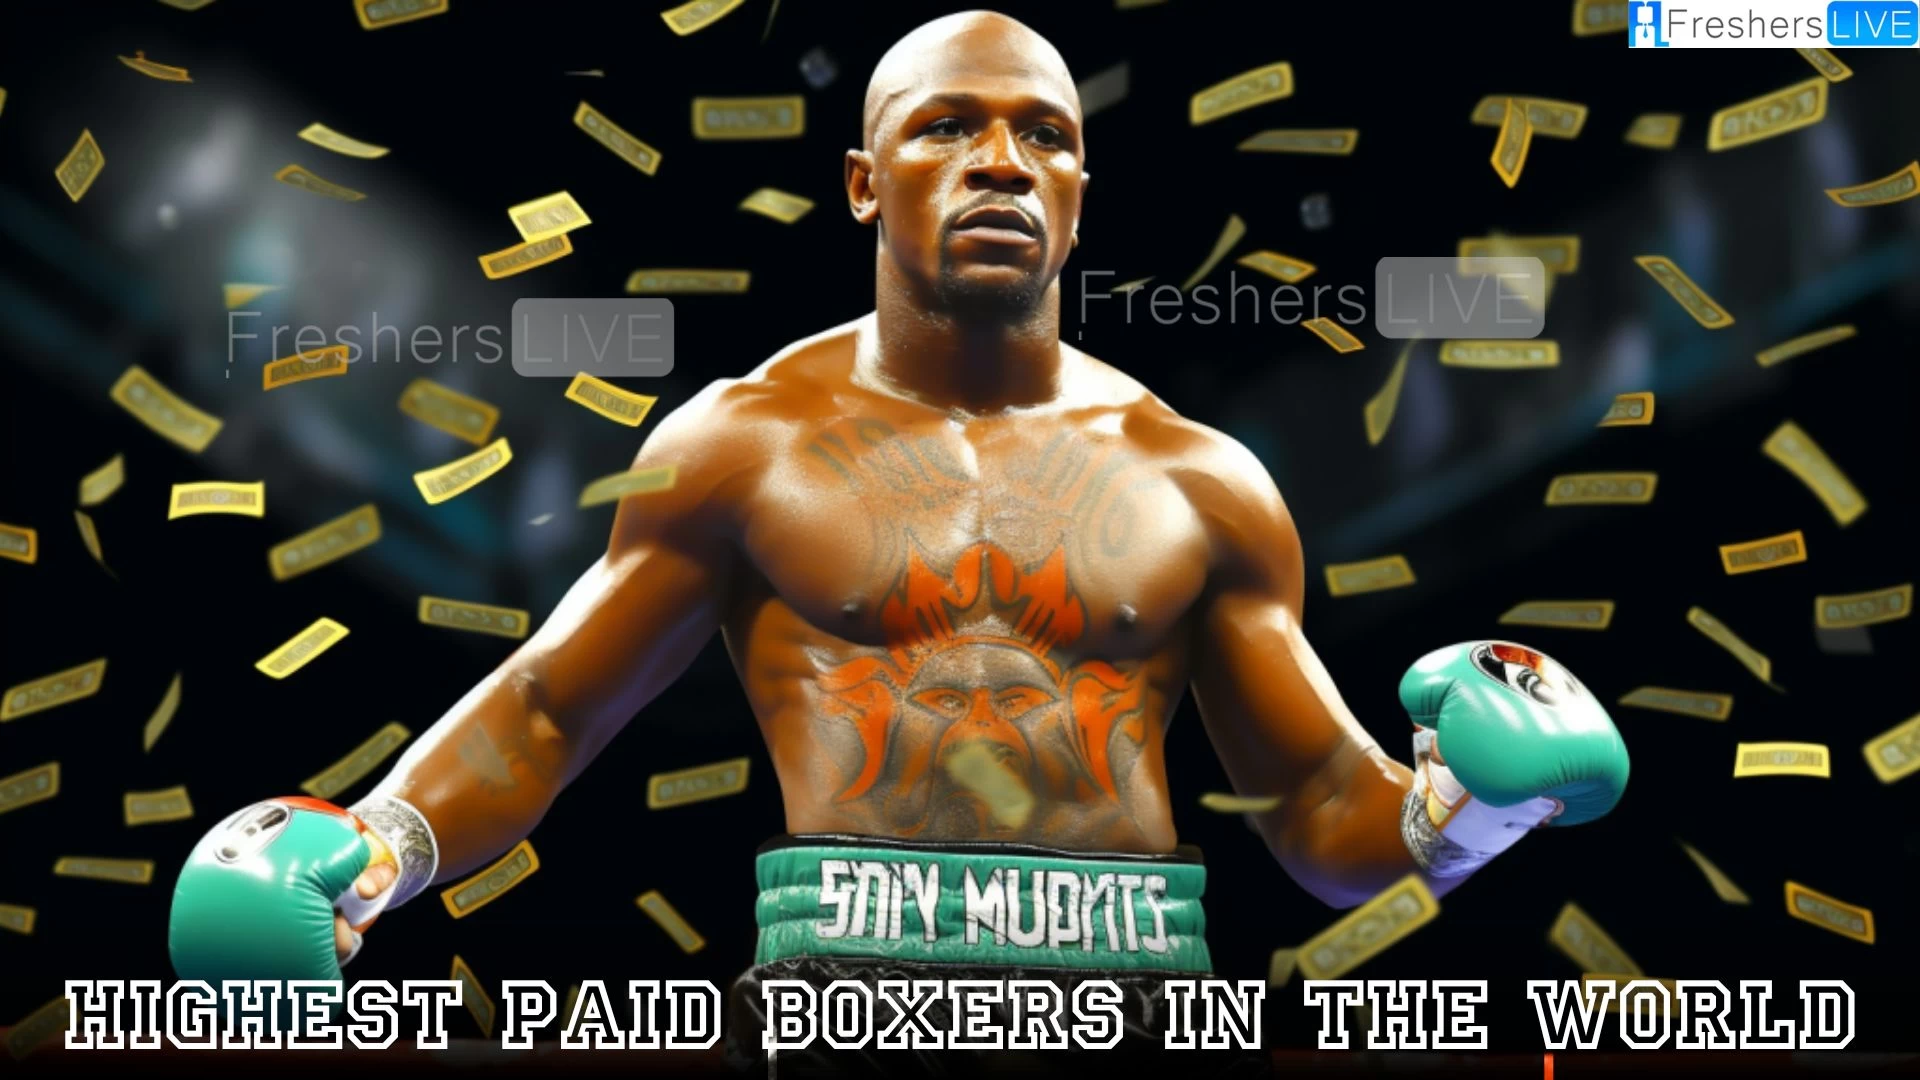 Highest Paid Boxers in the World - Top 10 Listed